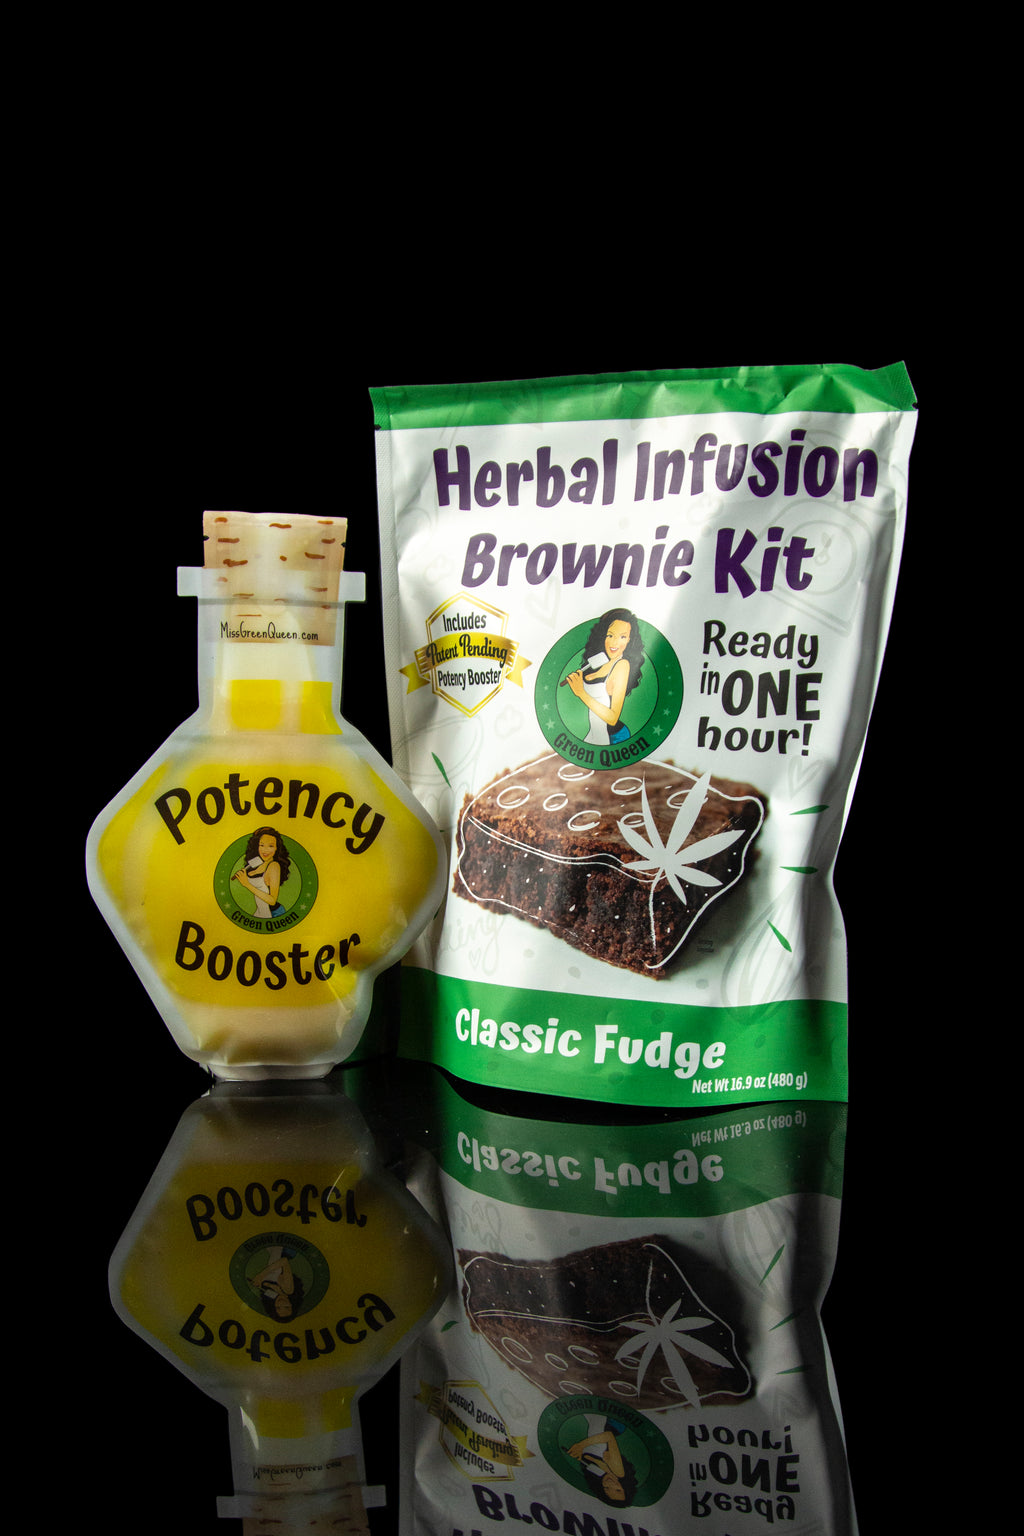 Green Queen Herbal Infusion Brownie Kit with Potency Booster